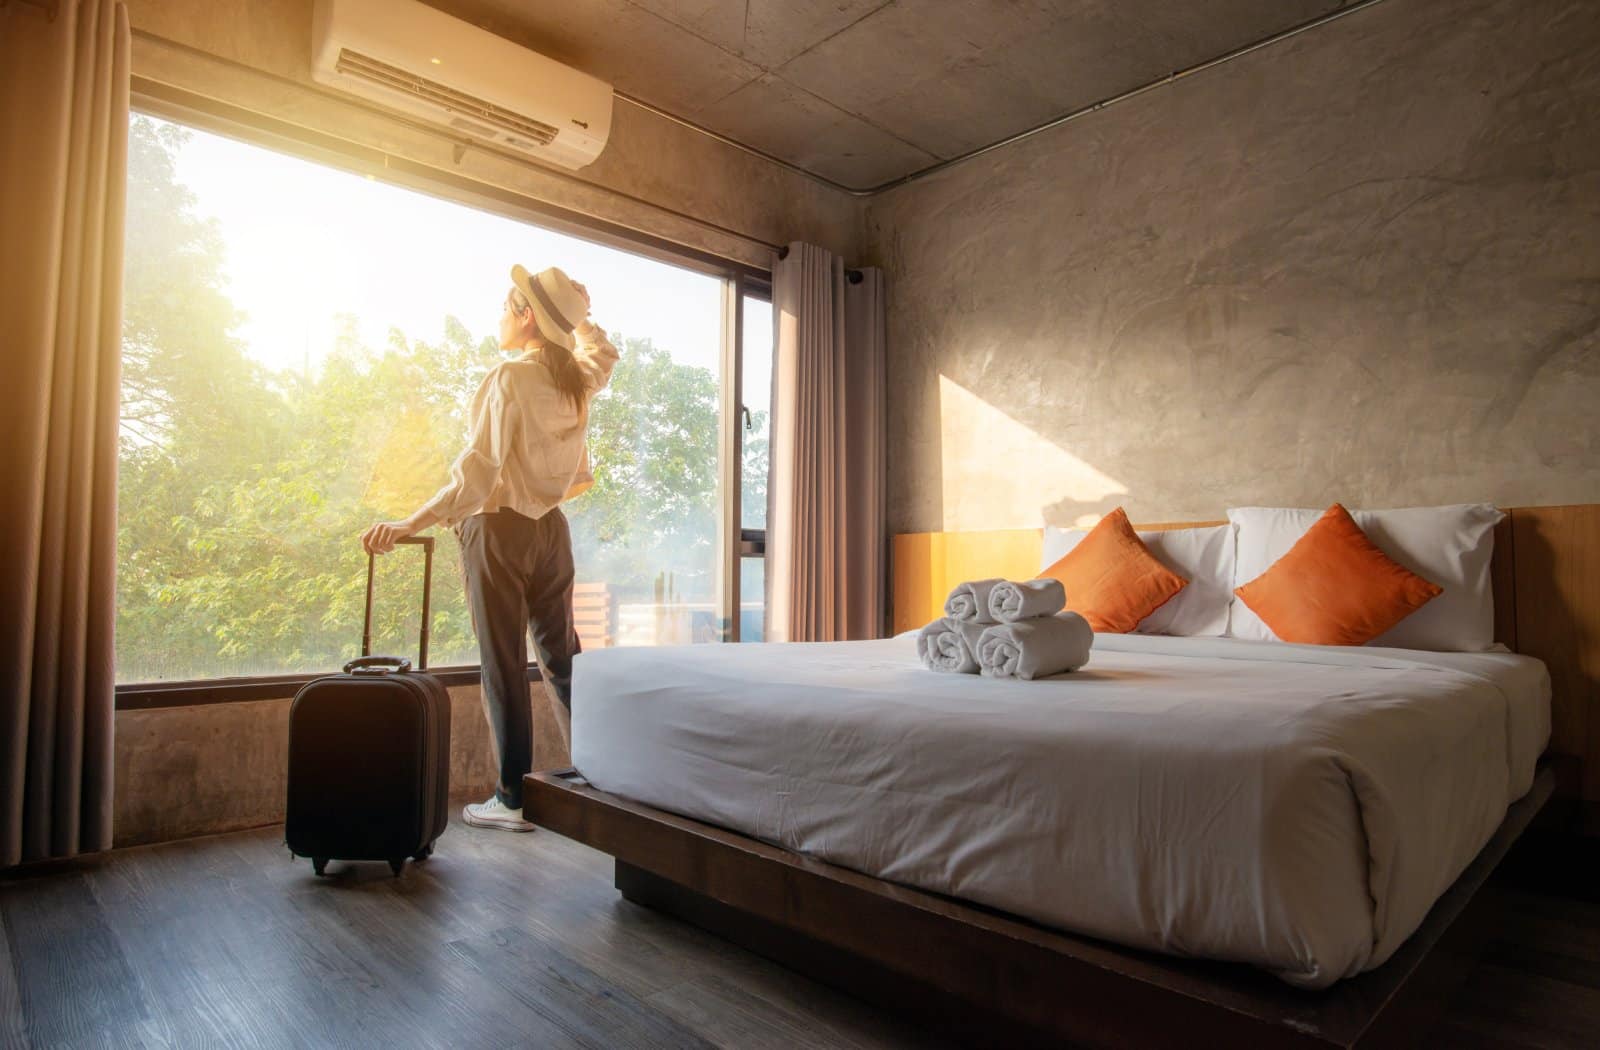 <p class="wp-caption-text">Image Credit: Shutterstock / Boyloso</p>  <p><span>When planning your travels, finding the perfect place to stay can sometimes lead you into the murky waters of accommodation scams. These fraudulent listings can appear on even the most reputable booking platforms, offering accommodations that are significantly different from their descriptions or, in some cases, don’t exist at all.</span></p>